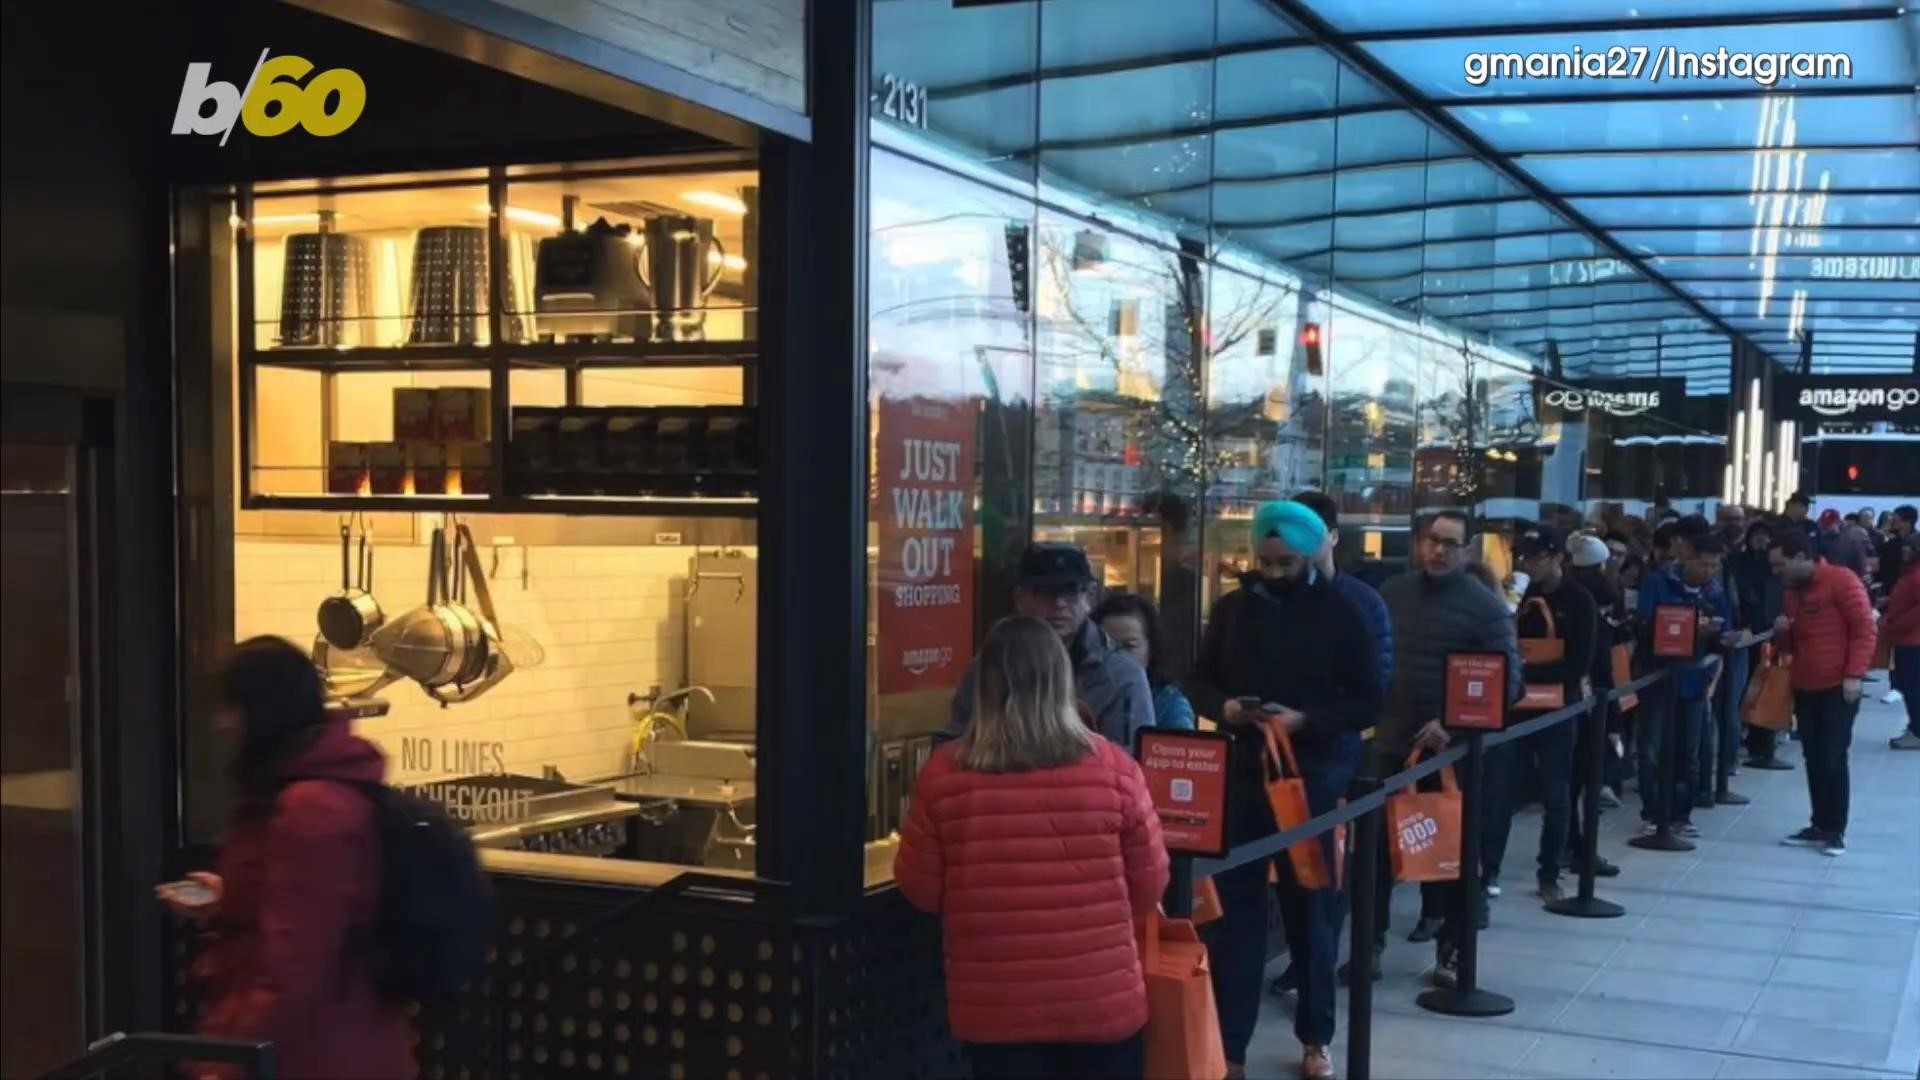 Long lines wrapped around the block as eager customers waited to be among the first to shop at Amazon Go; a first-of-its-kind grocery store that promises no lines. The irony wasn't lost on people as they posted the chaos to social media. Sean Dowling (@se